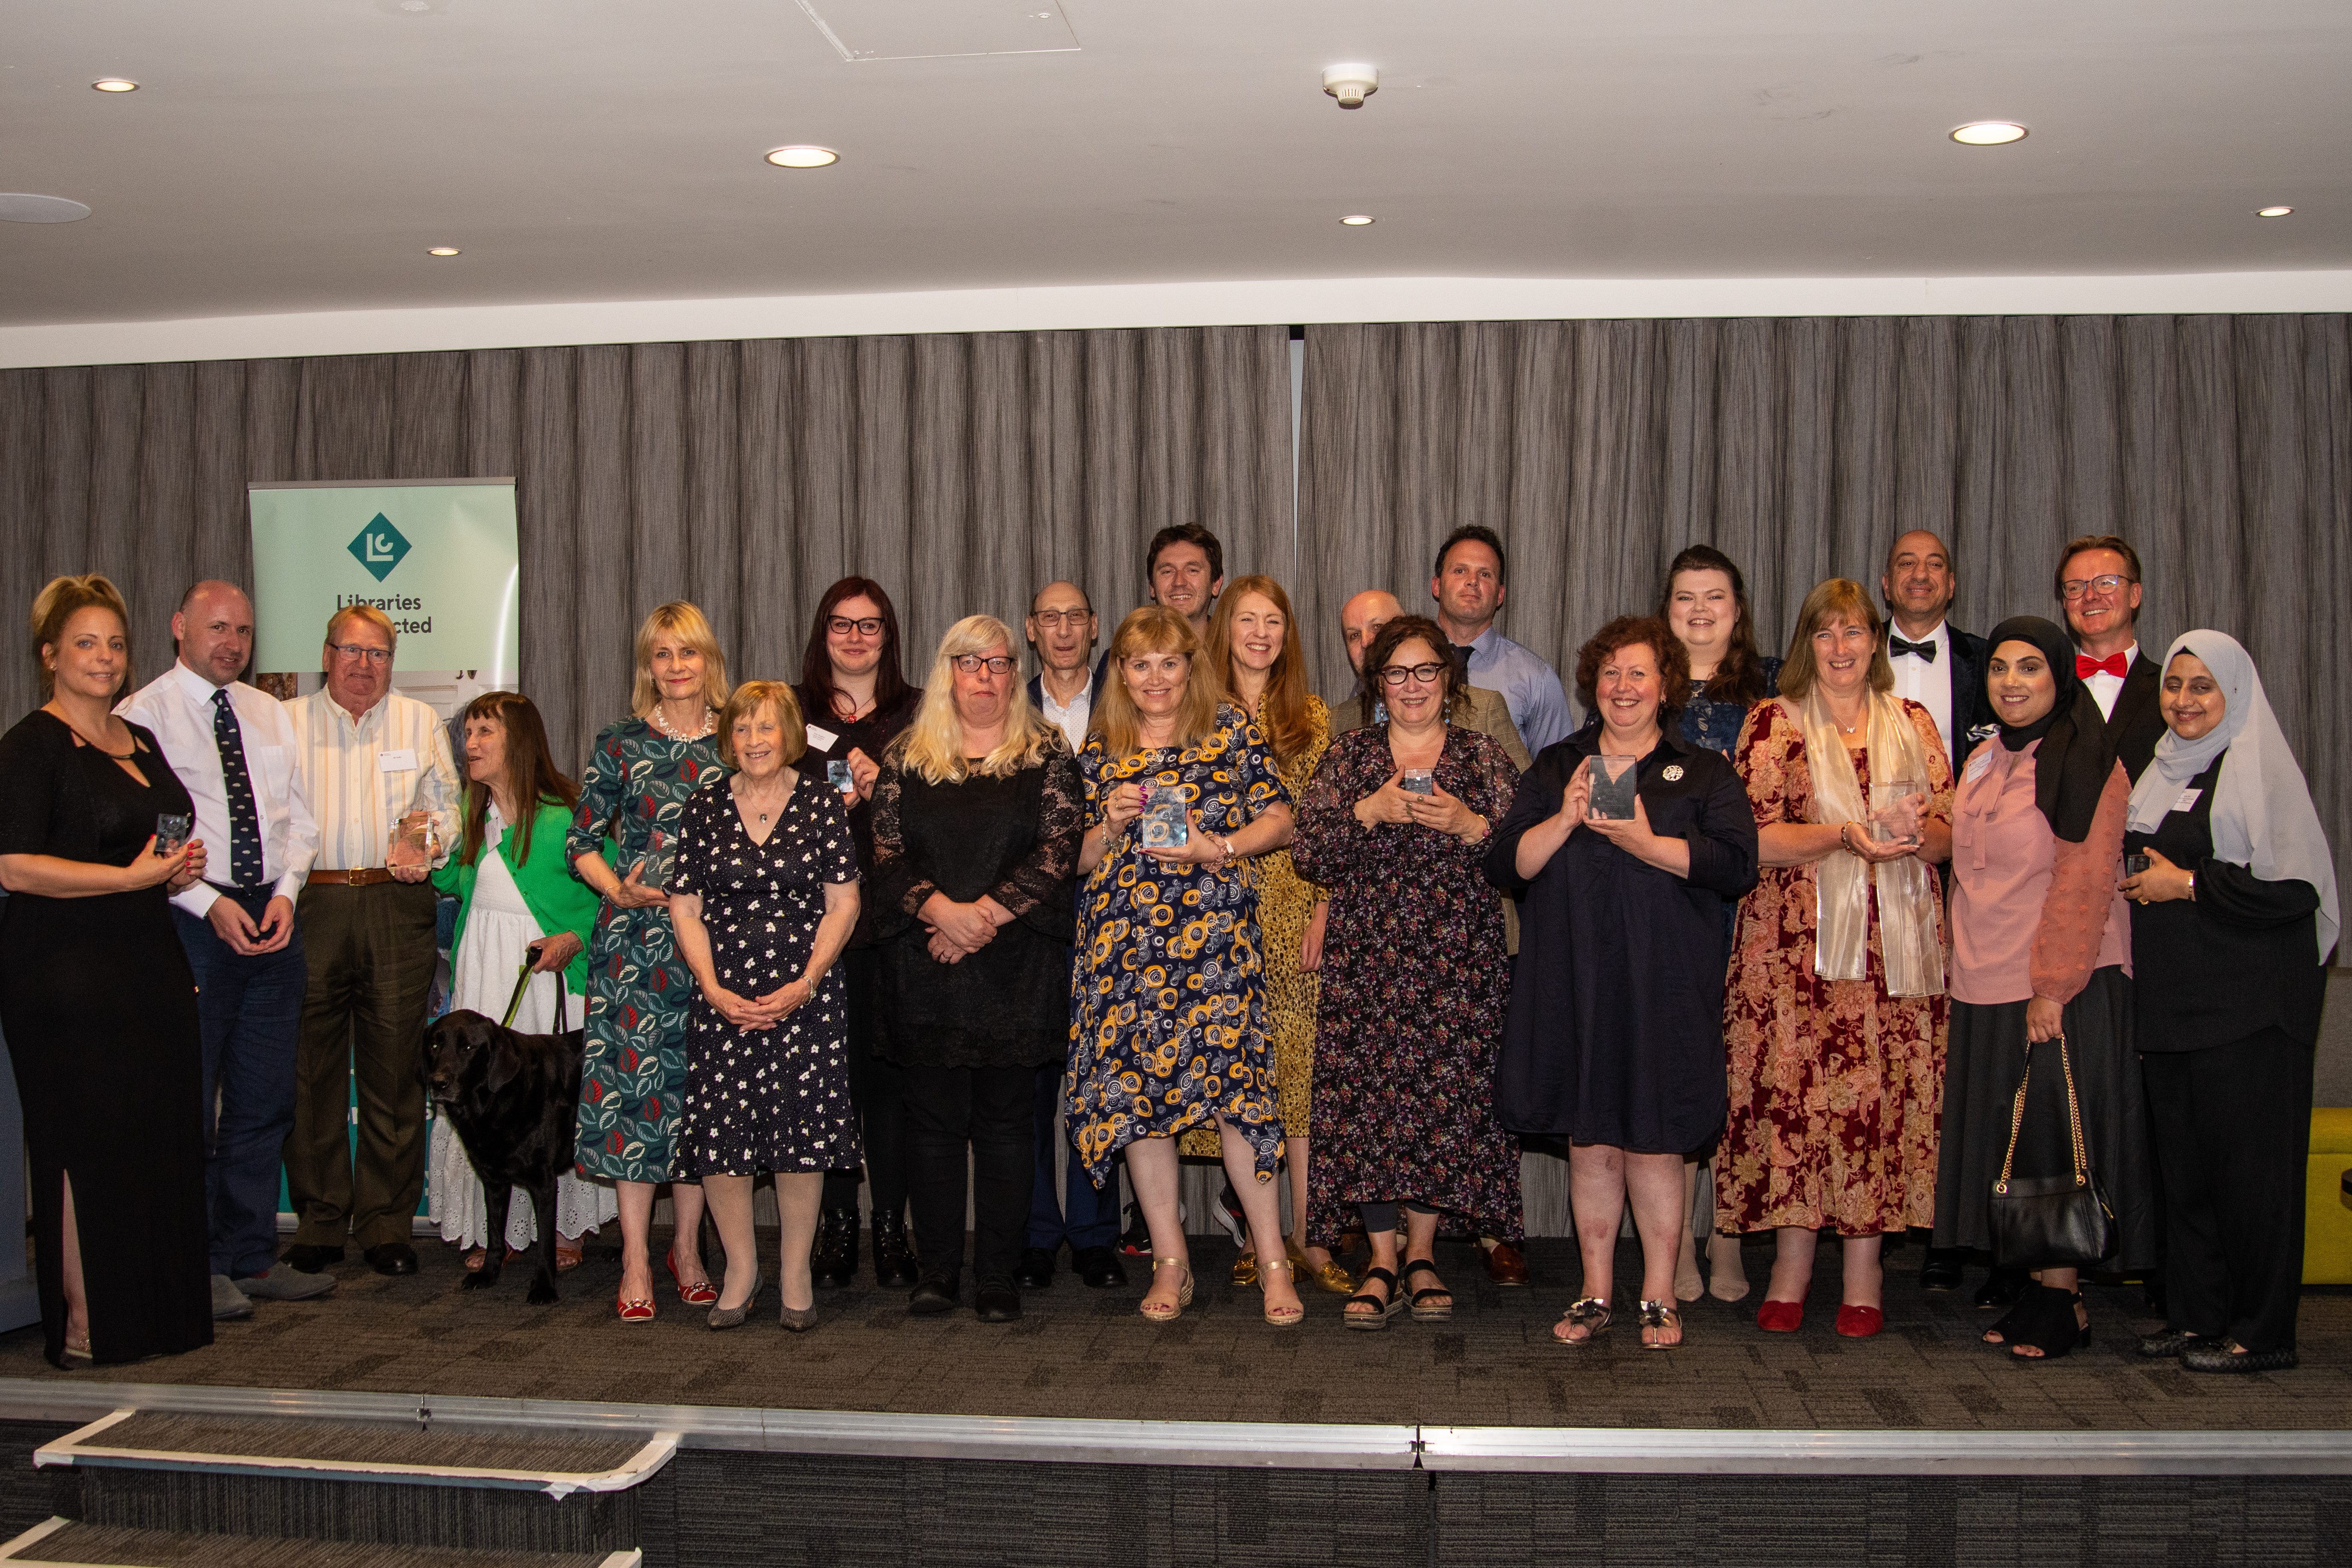 The Libraries Connected Awards winners for 2023.